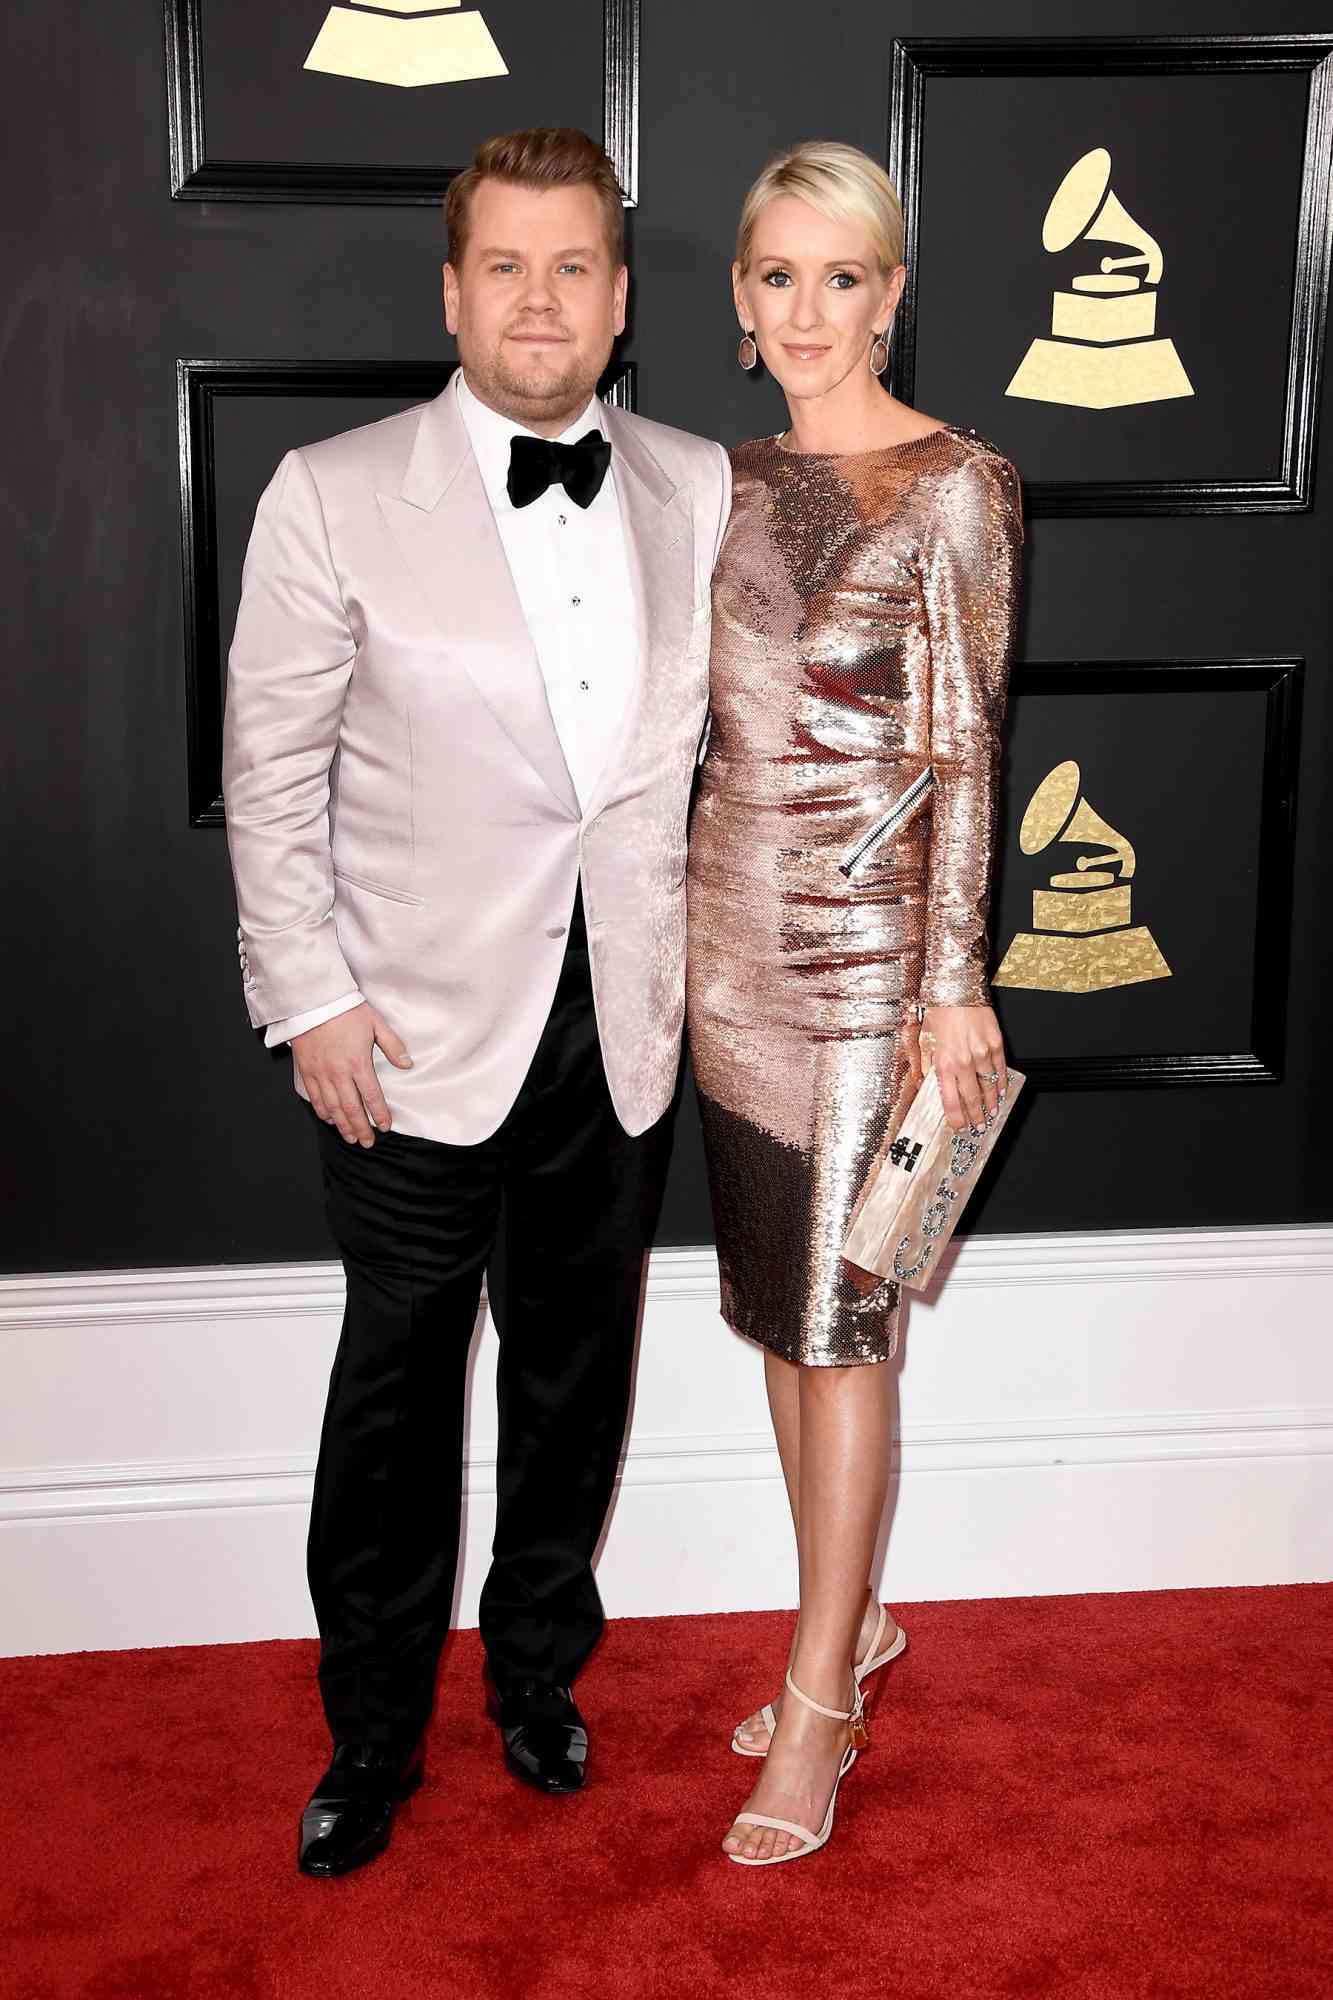 The 59th GRAMMY Awards - Arrivals